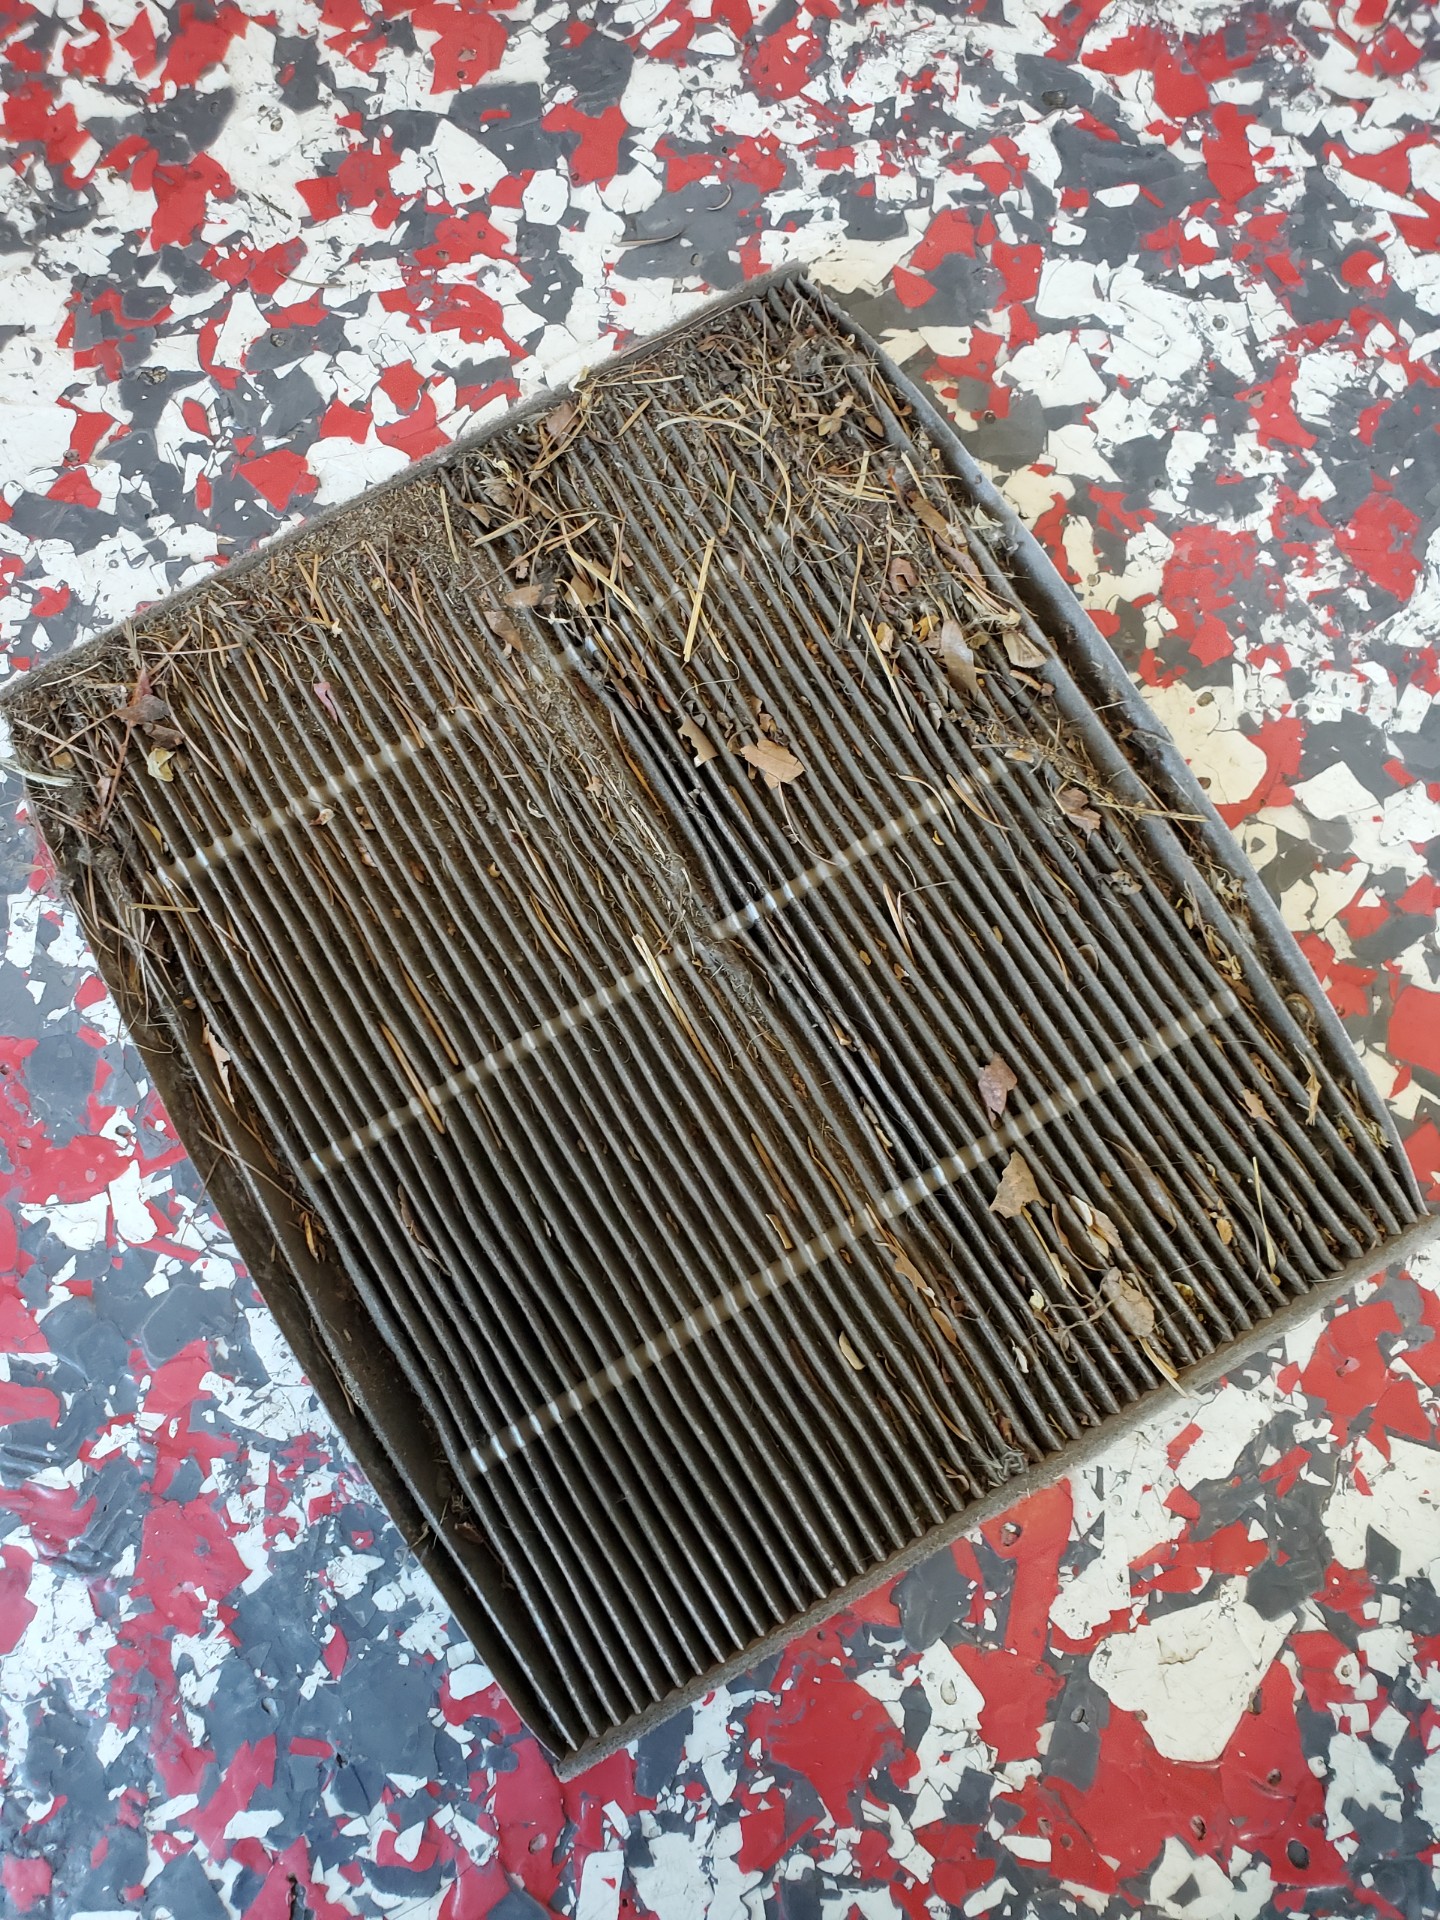 Do I change my cabin air filter?